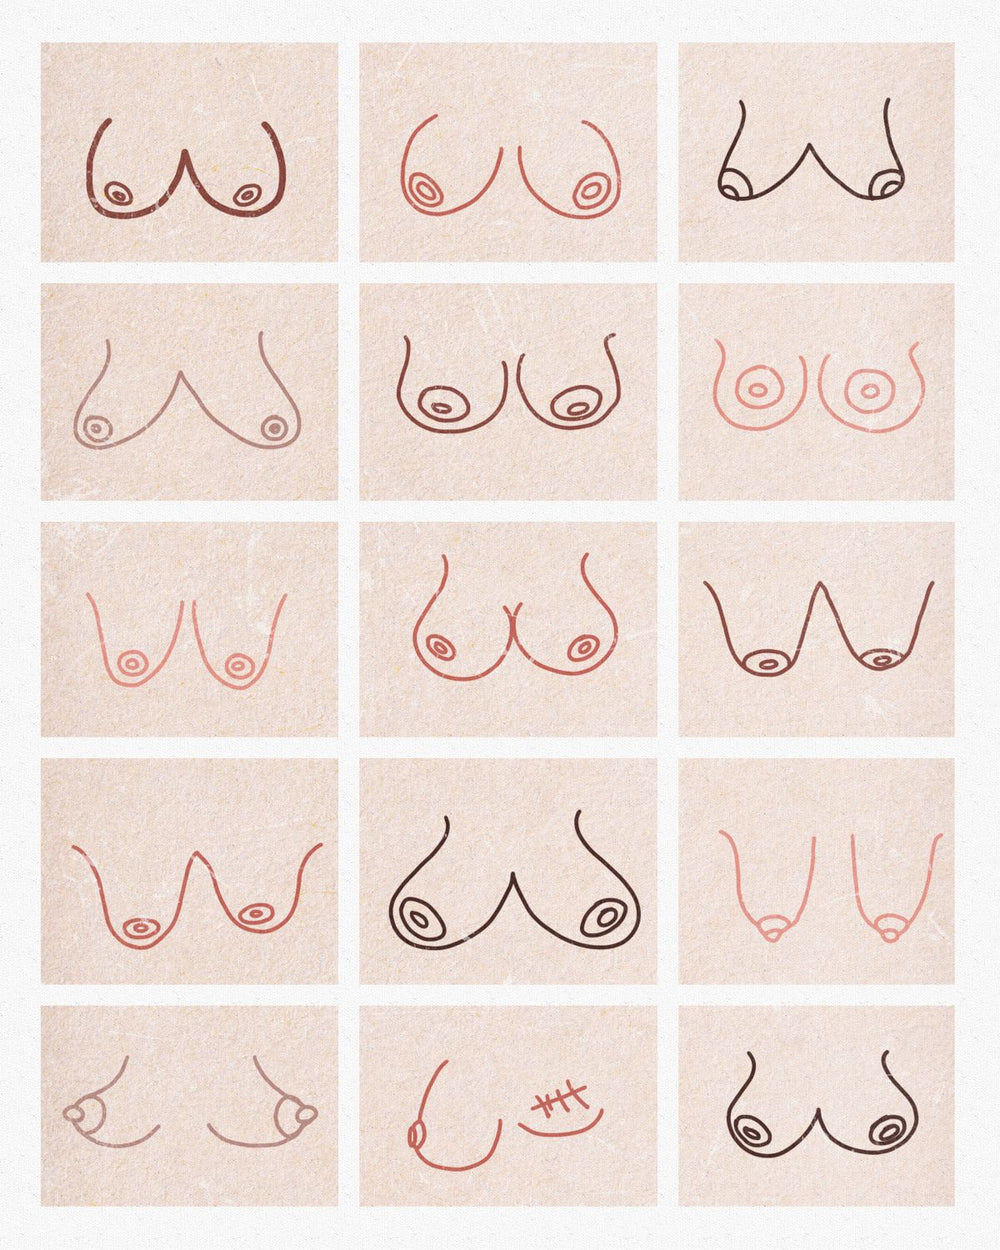 All Breasts Are Beautiful